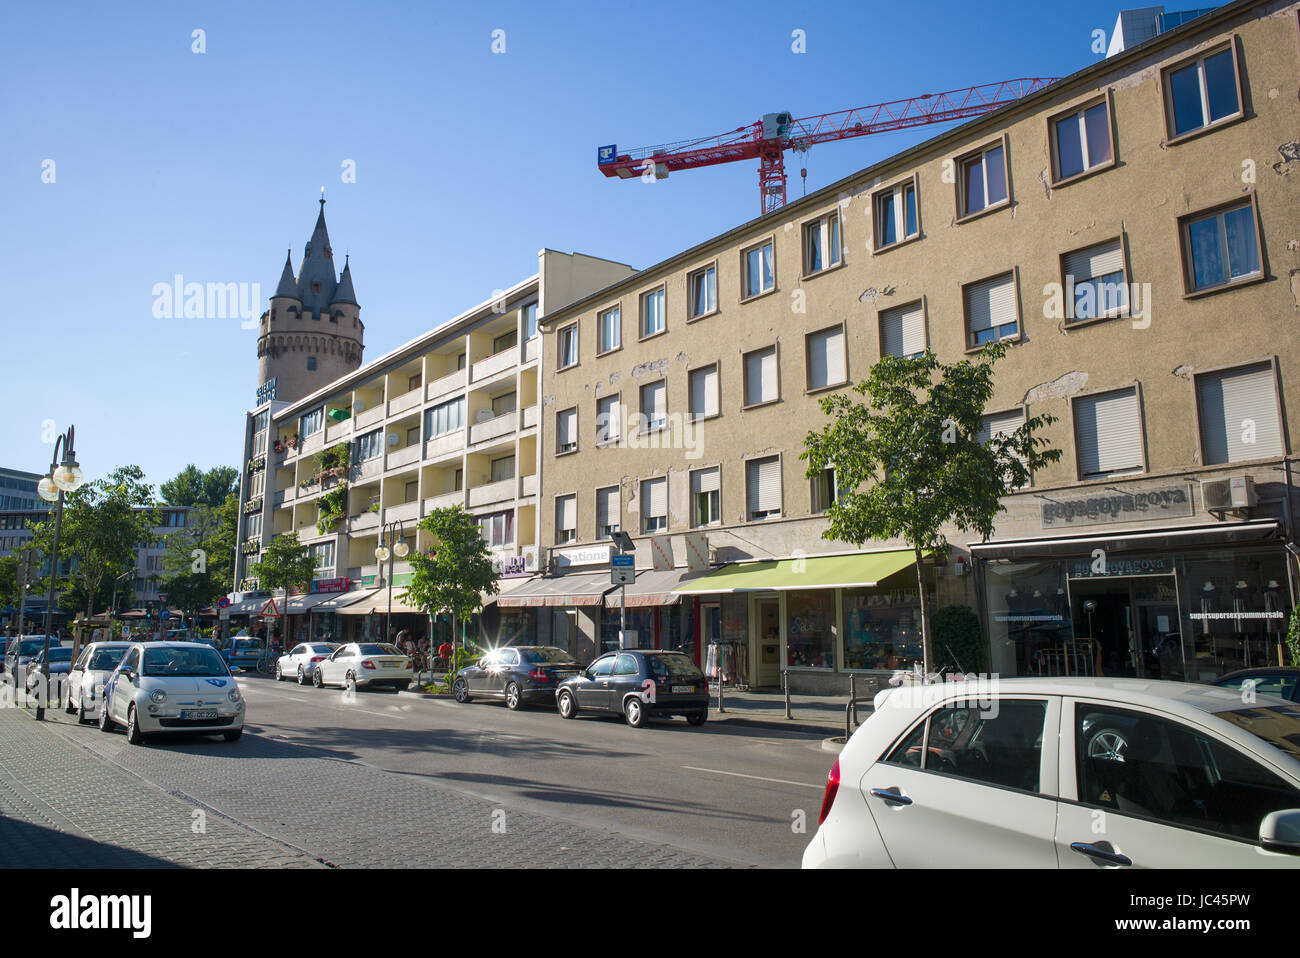 Low rise apartment building above shops wit former city fortification in background, Frankfurt am Main, Germany Stock Photo